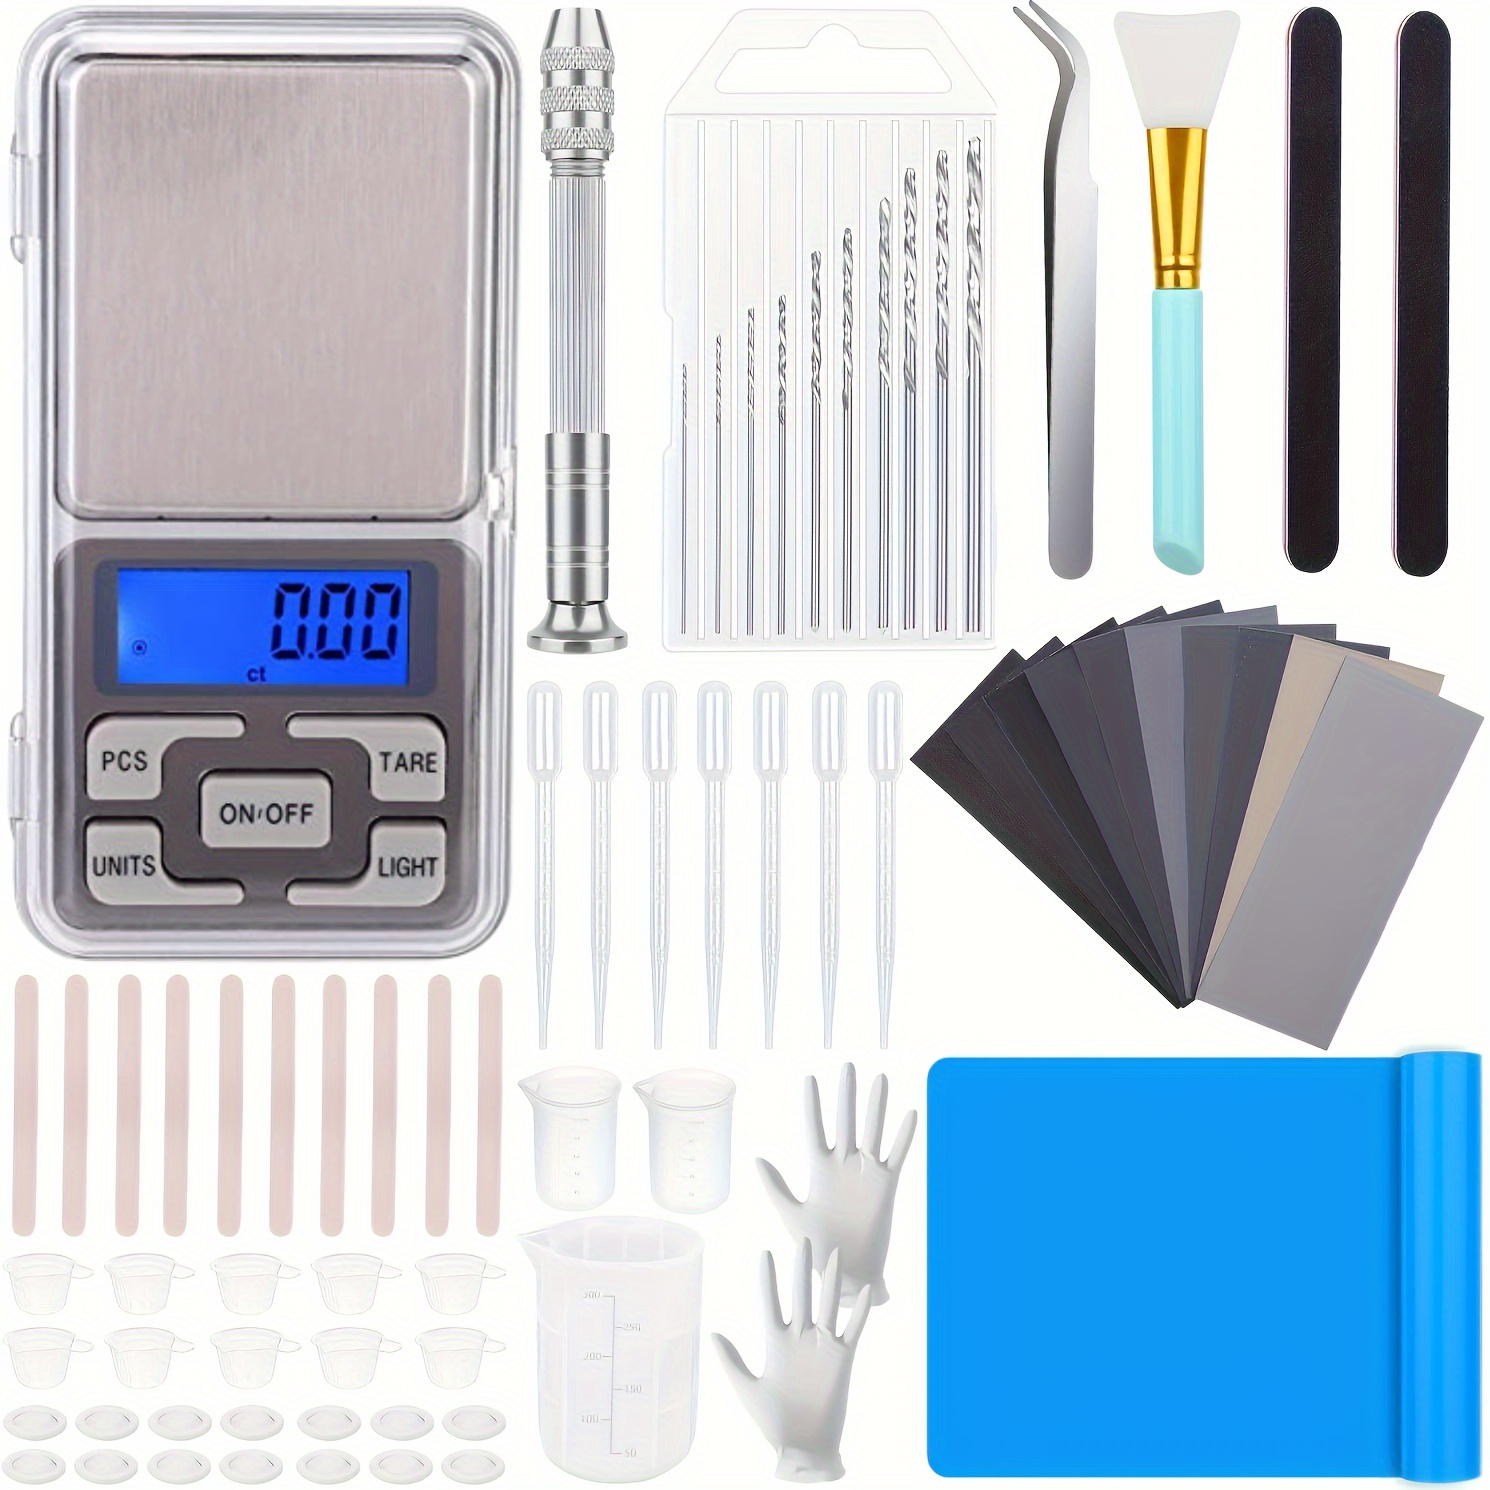 

170 Pcs Resin Tool Starter Kit, Epoxy Resin Tools Supplies With Silicone Sheet, Resin Drill, Sandpapers, Digital Pocket Scale, Silicone Mixing Cups For Resin Casting